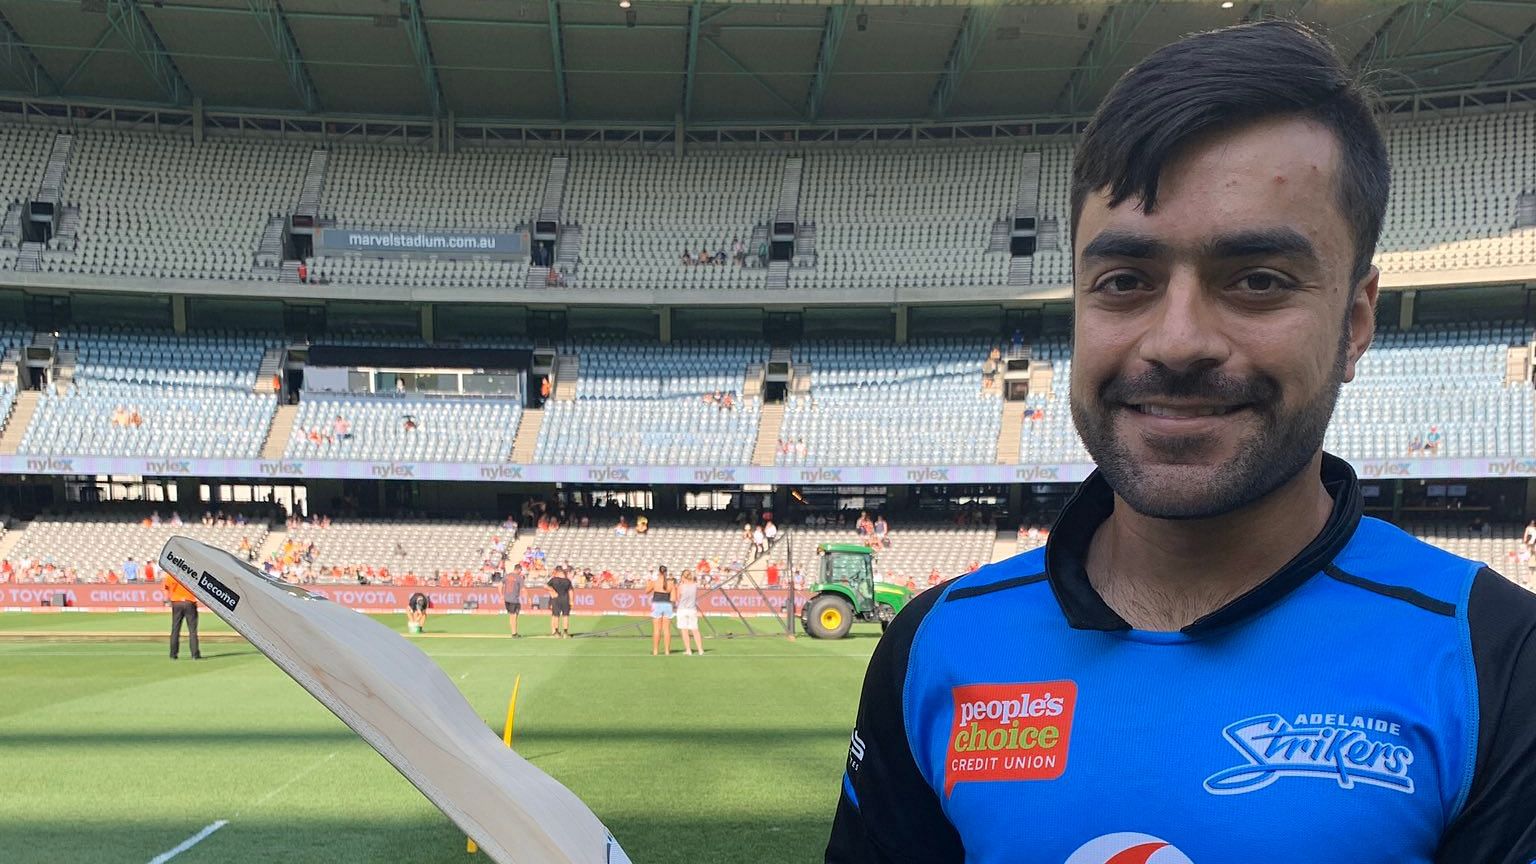 Afghanistan star Rashid Khan on Sunday flaunted a new bat design at the ongoing edition of the Big Bash League.